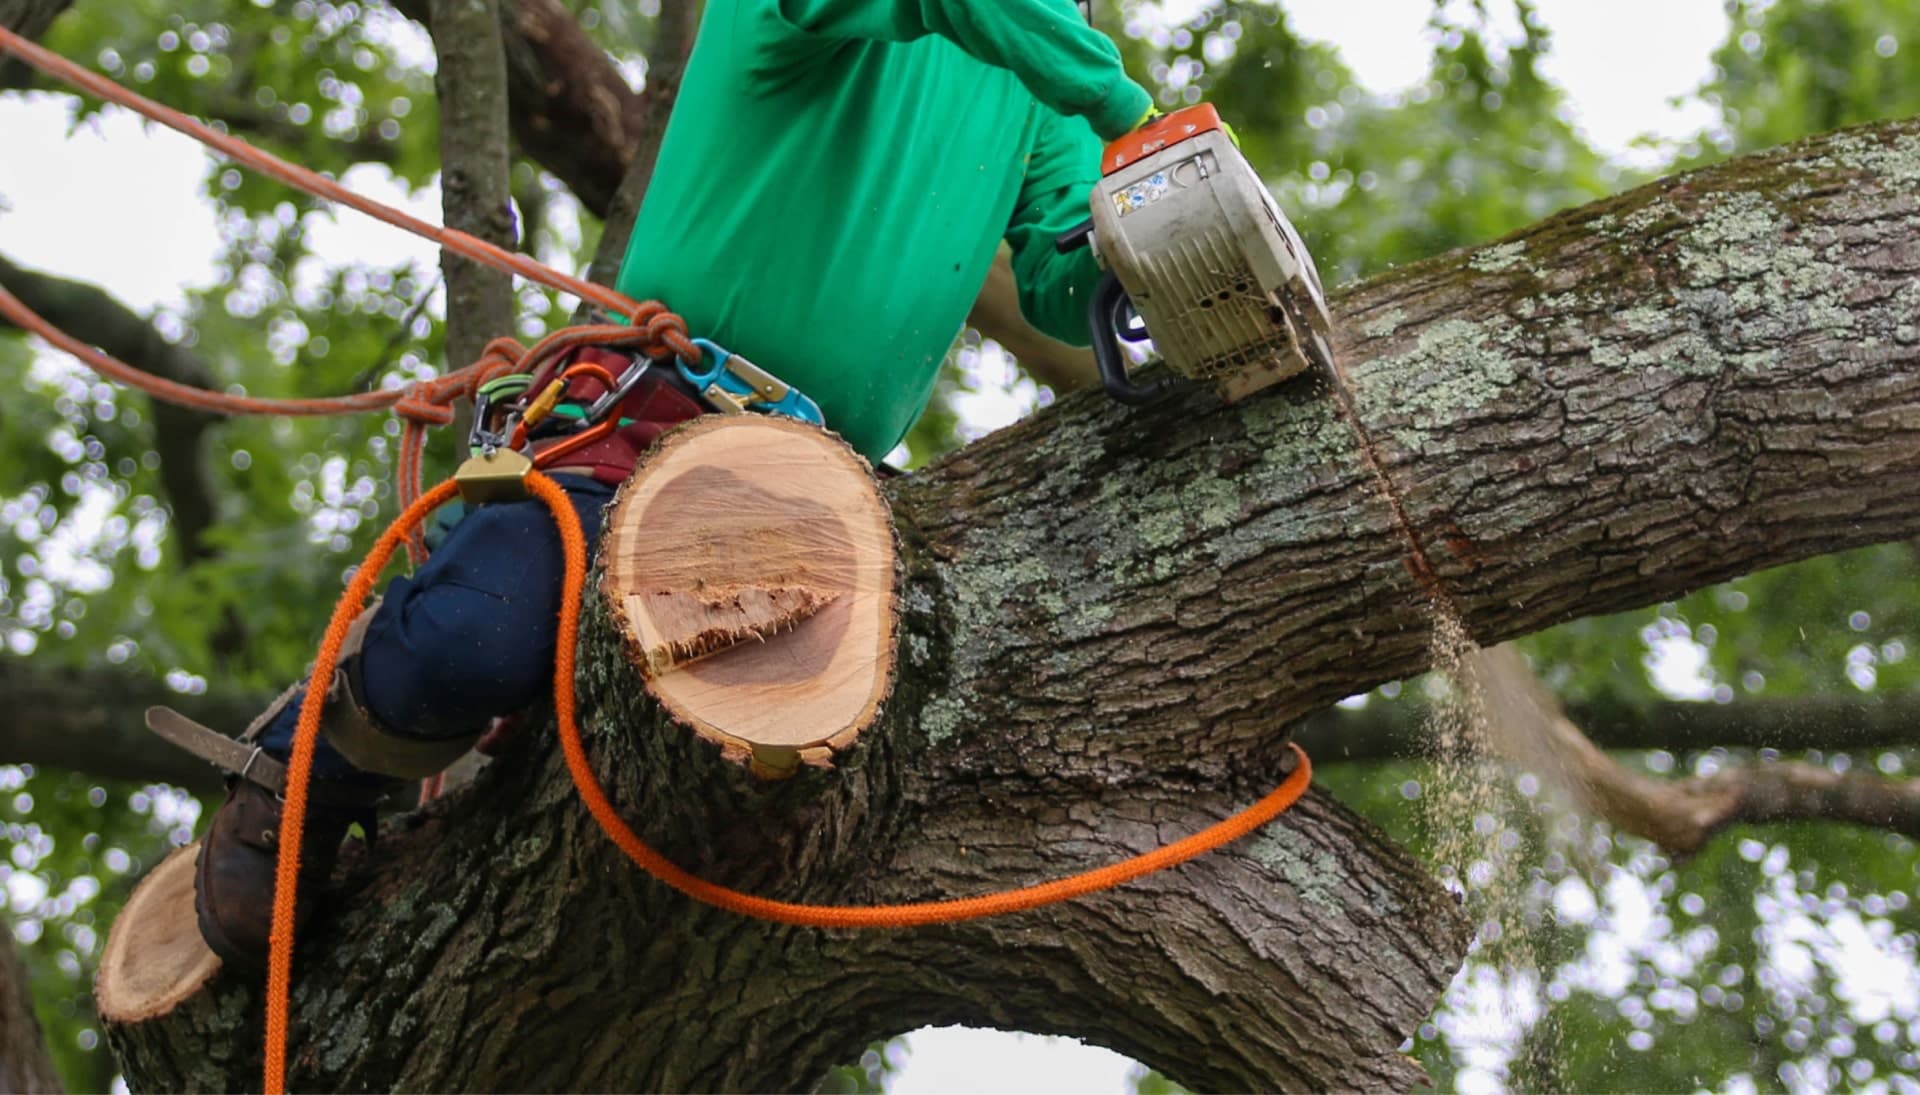 Shed your worries away with best tree removal in Iowa City